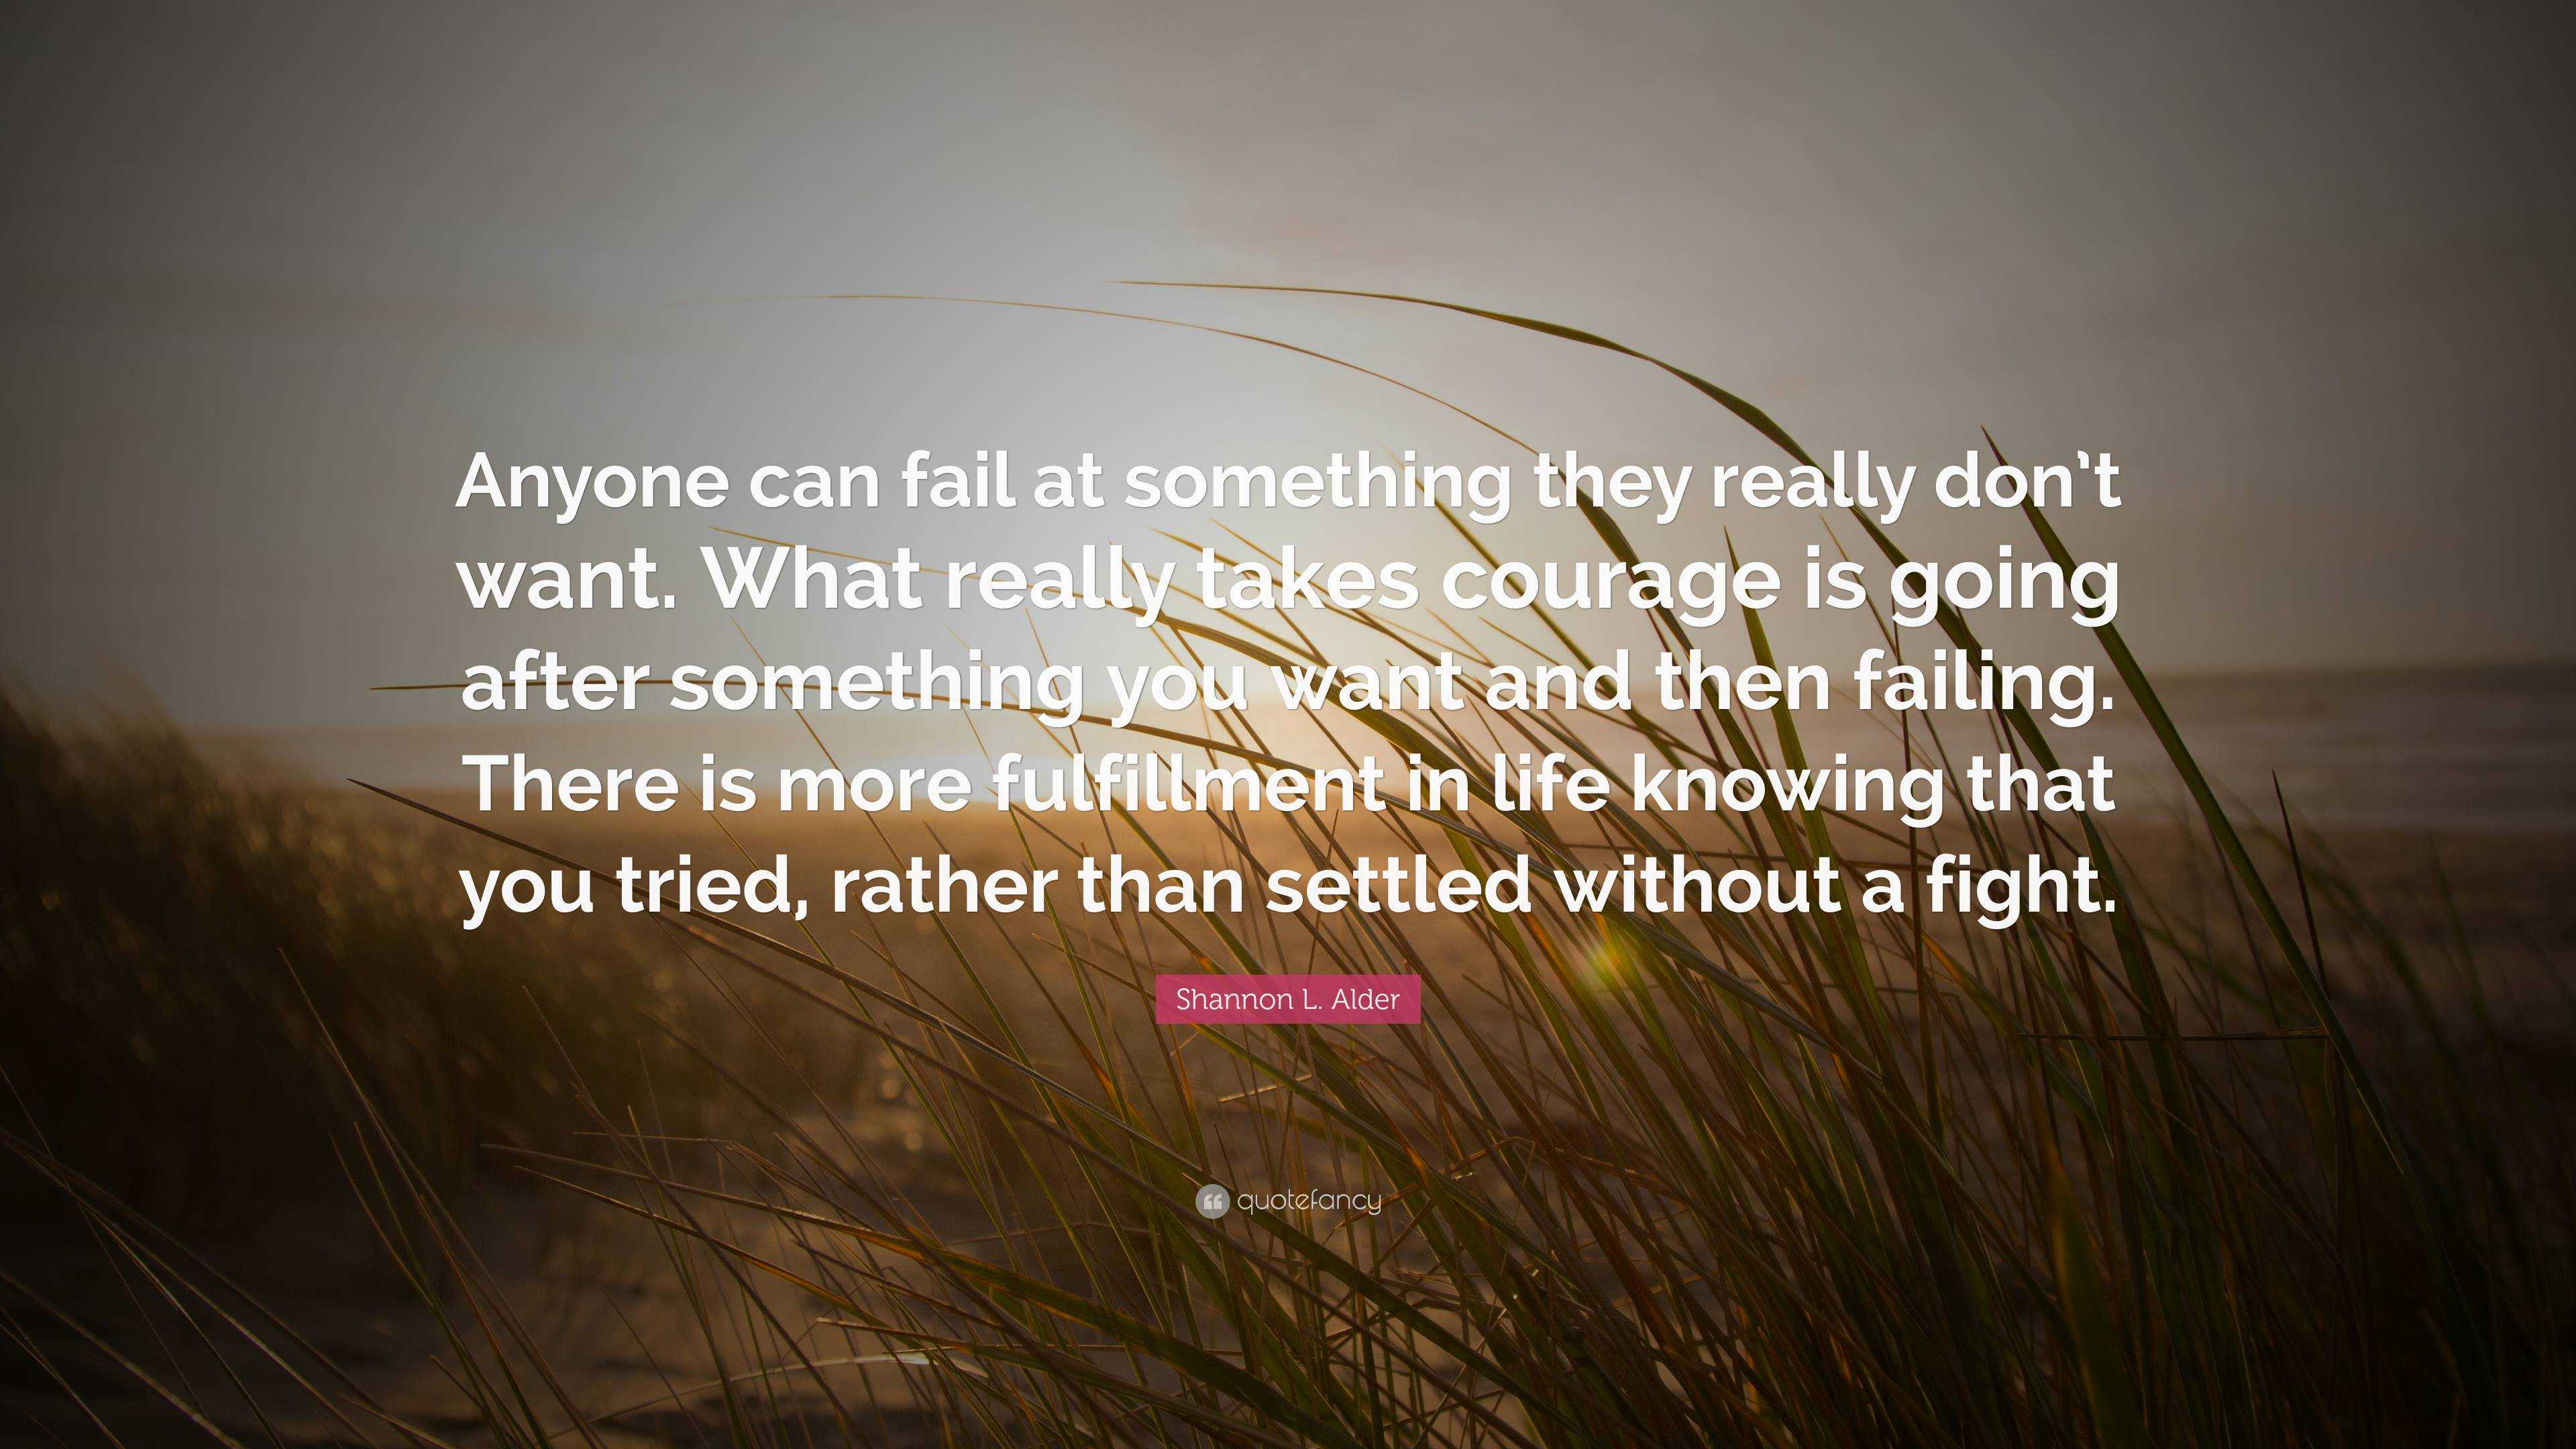 https://quotefancy.com/media/wallpaper/3840x2160/6397416-Shannon-L-Alder-Quote-Anyone-can-fail-at-something-they-really-don.jpg